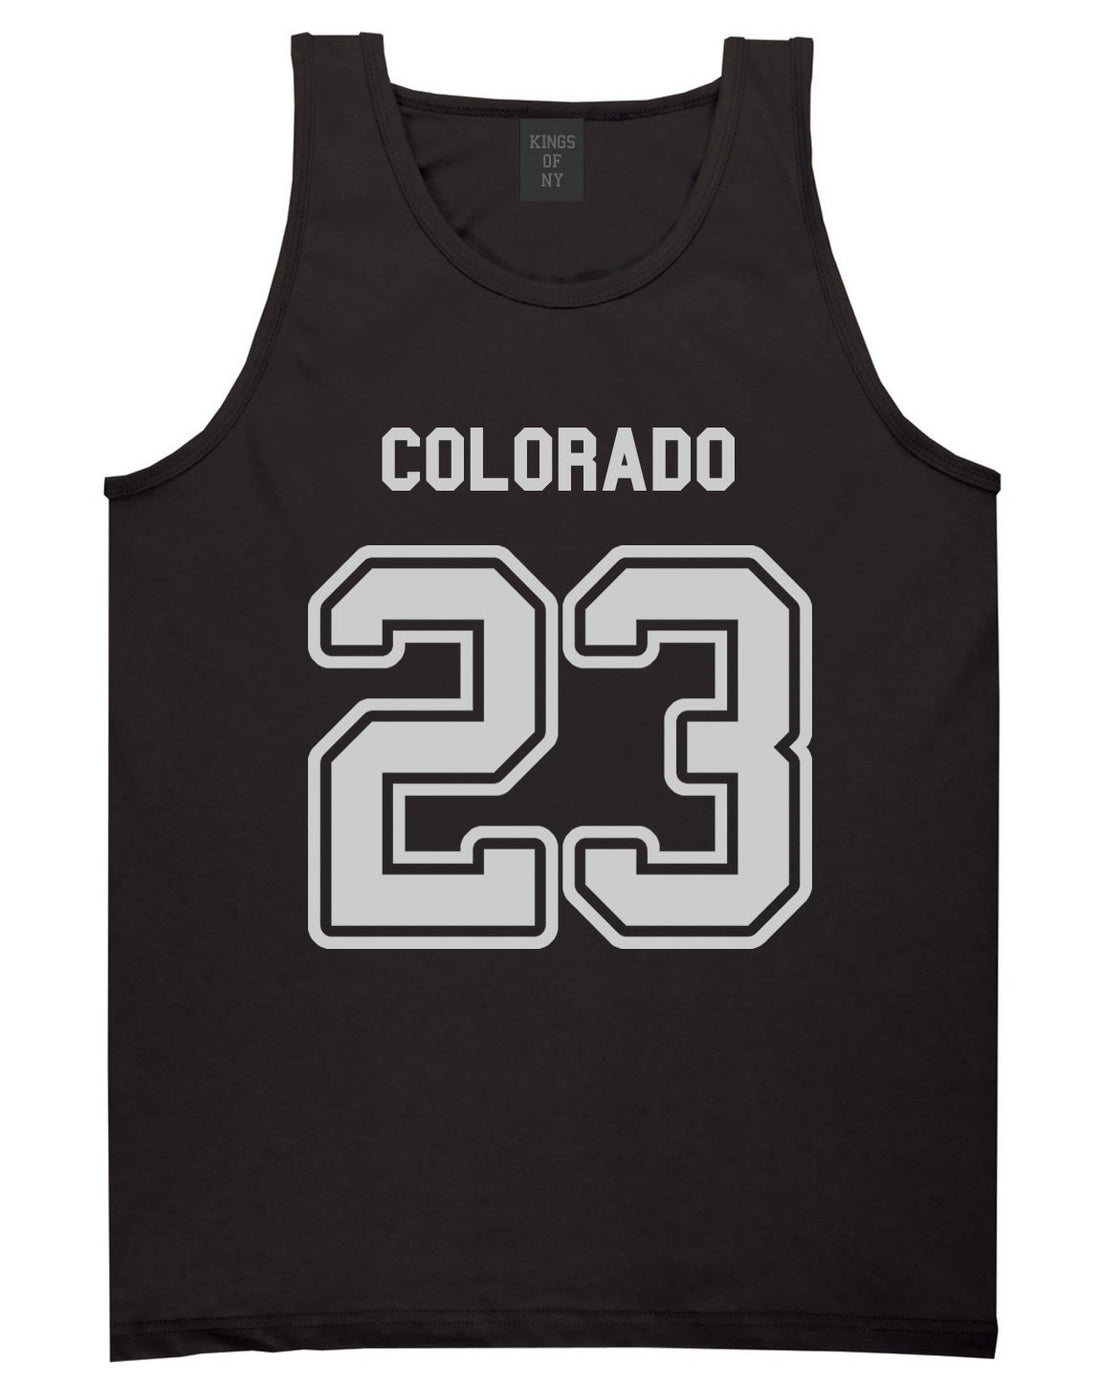 Sport Style Colorado 23 Team State Jersey Mens Tank Top By Kings Of NY